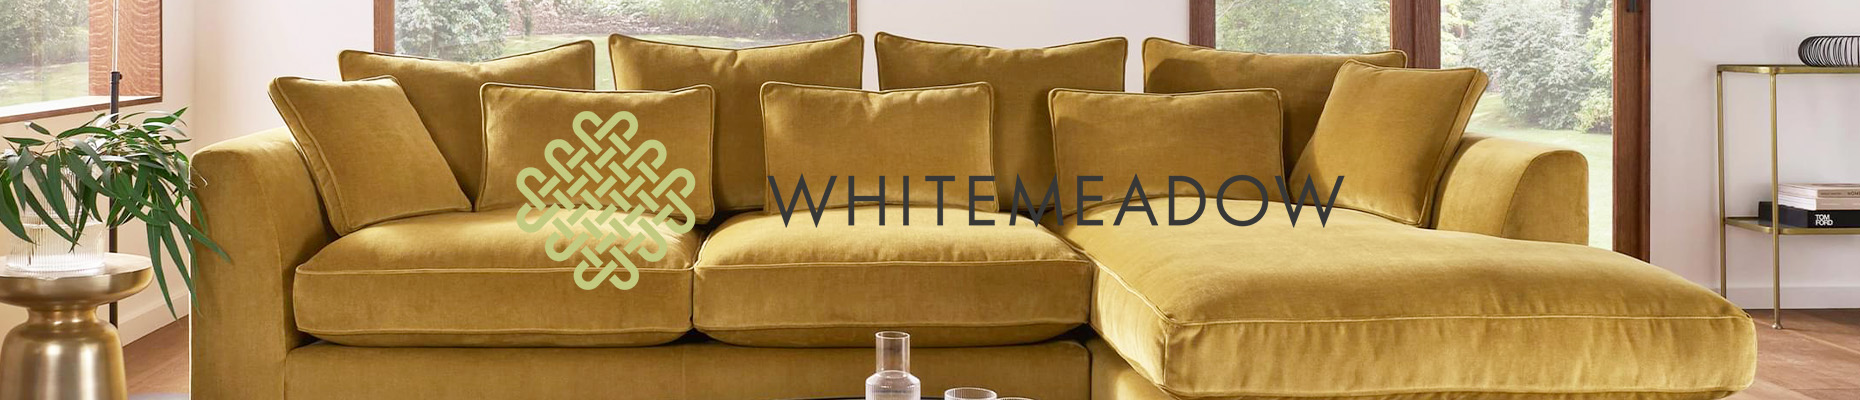 Whitemeadow at Forrest Furnishing